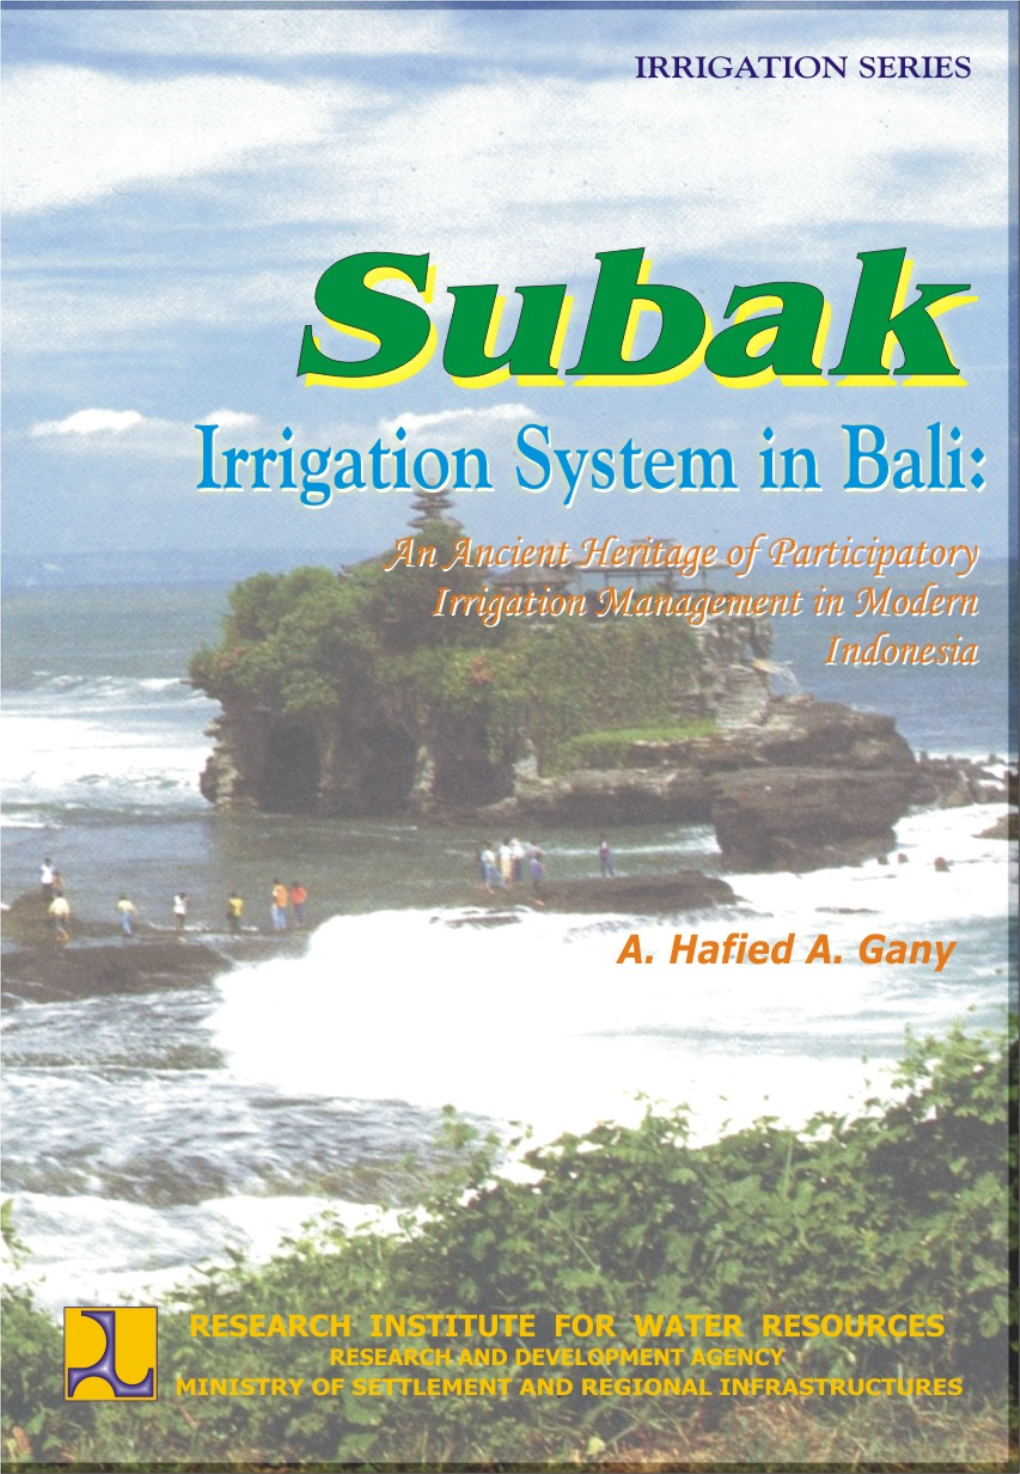 Subak Irrigation System in Bali: an Ancient Heritage of Participatory Irrigation Management in Modern Indonesia” ISBN 979-9477-32-8 631.587095986